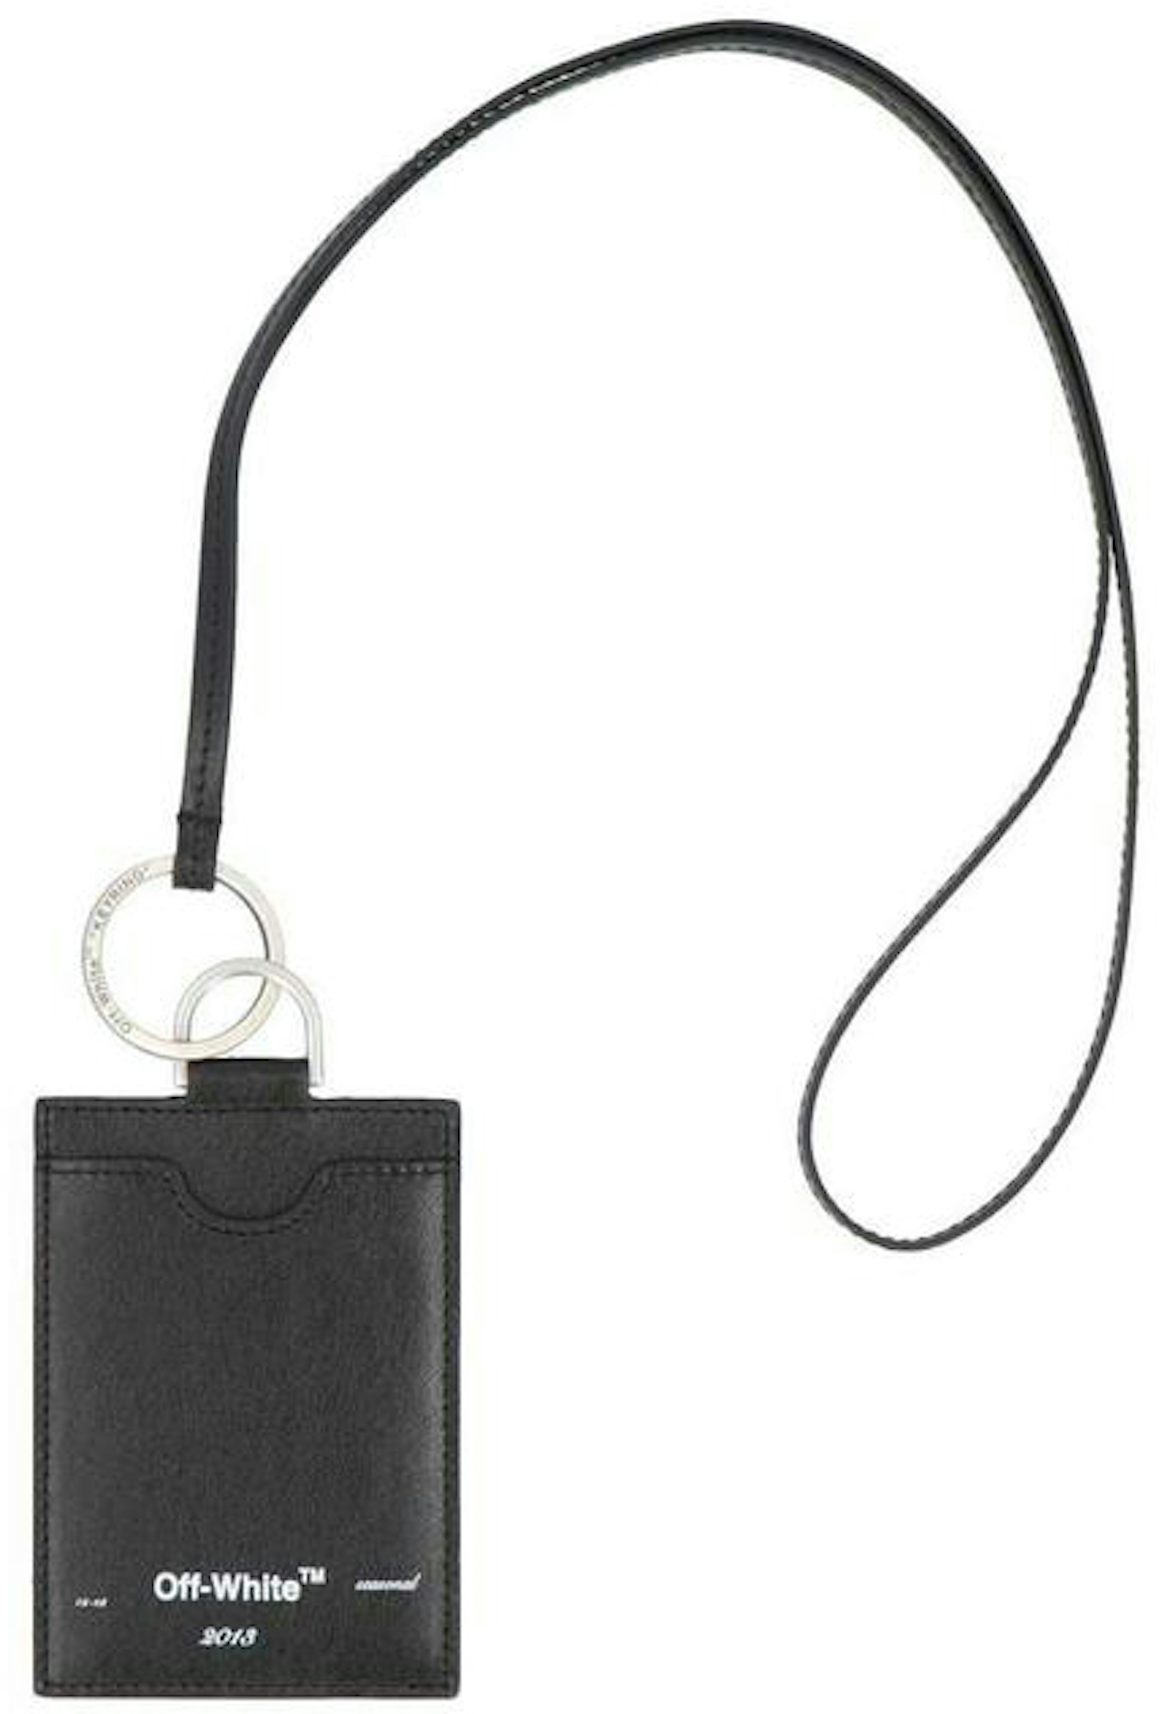 NYDOCCS Leather Neck Badge Holder with Chain  Leather Badge Holder  Blackinton Smith Warren